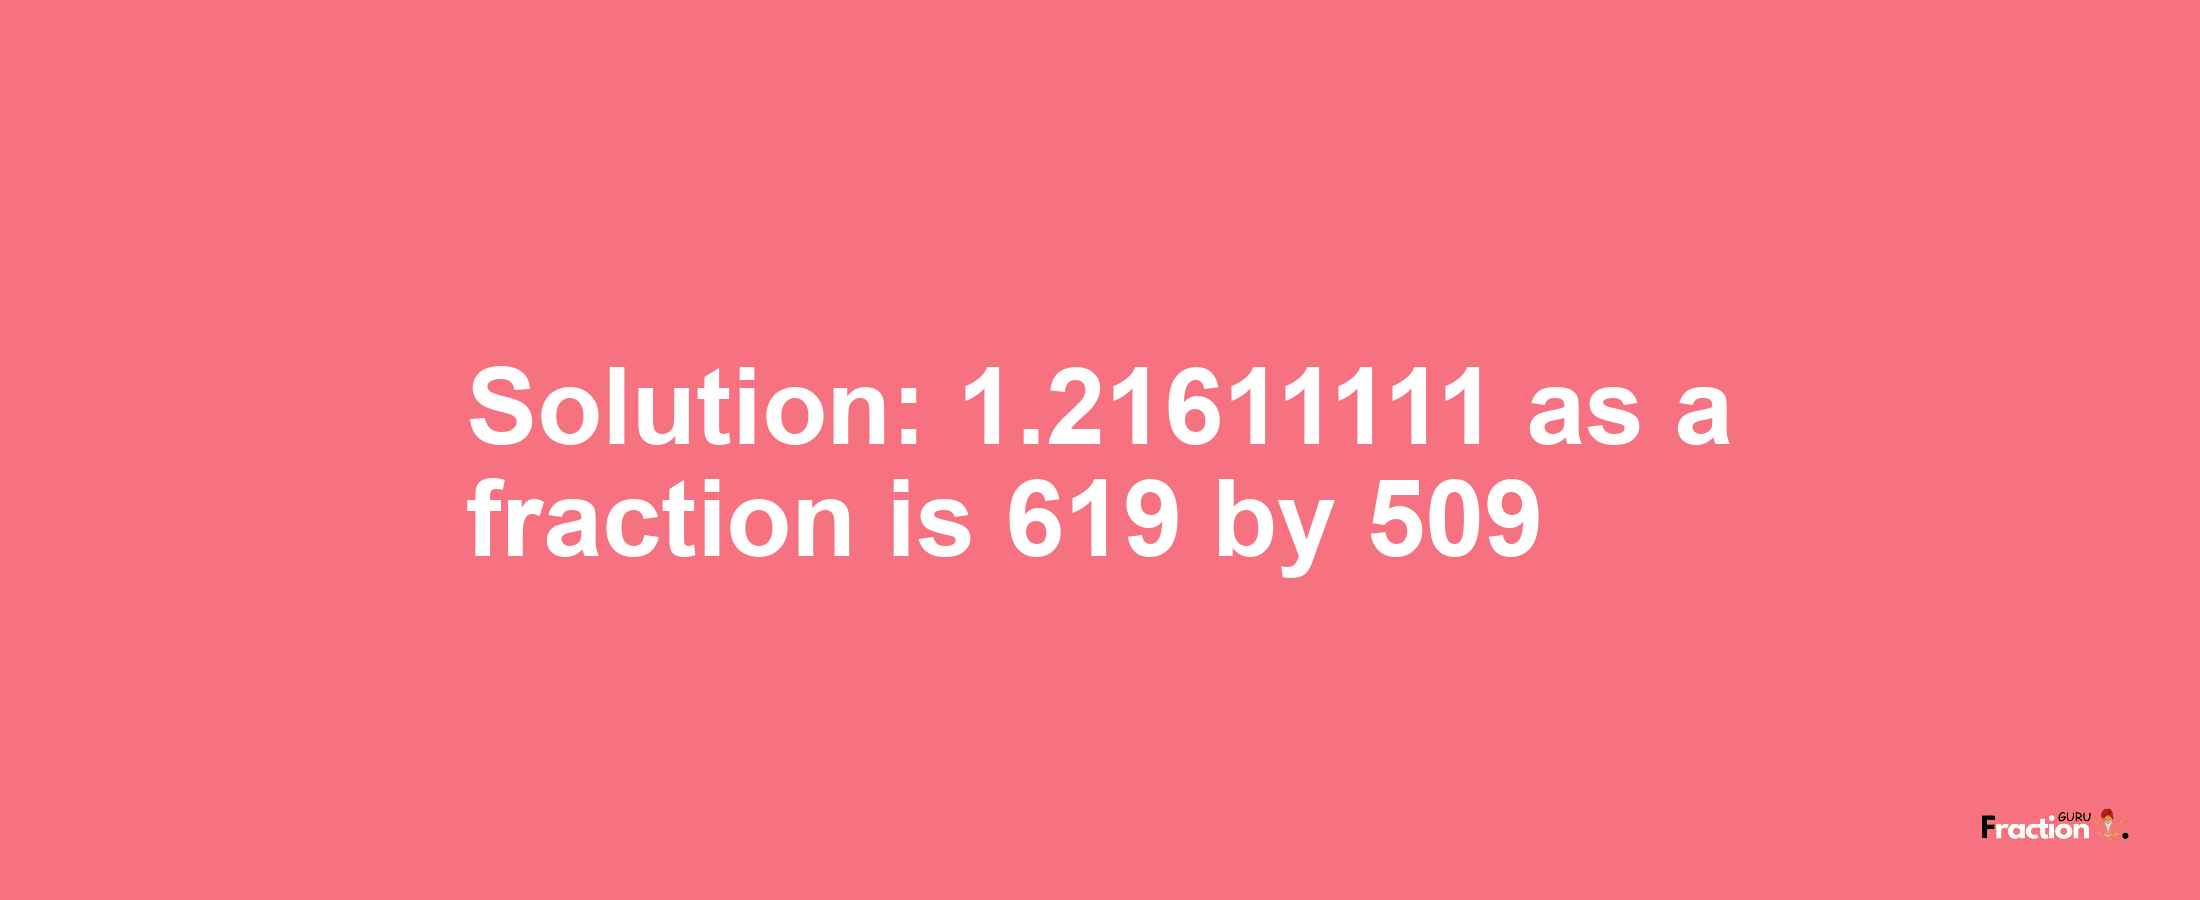 Solution:1.21611111 as a fraction is 619/509